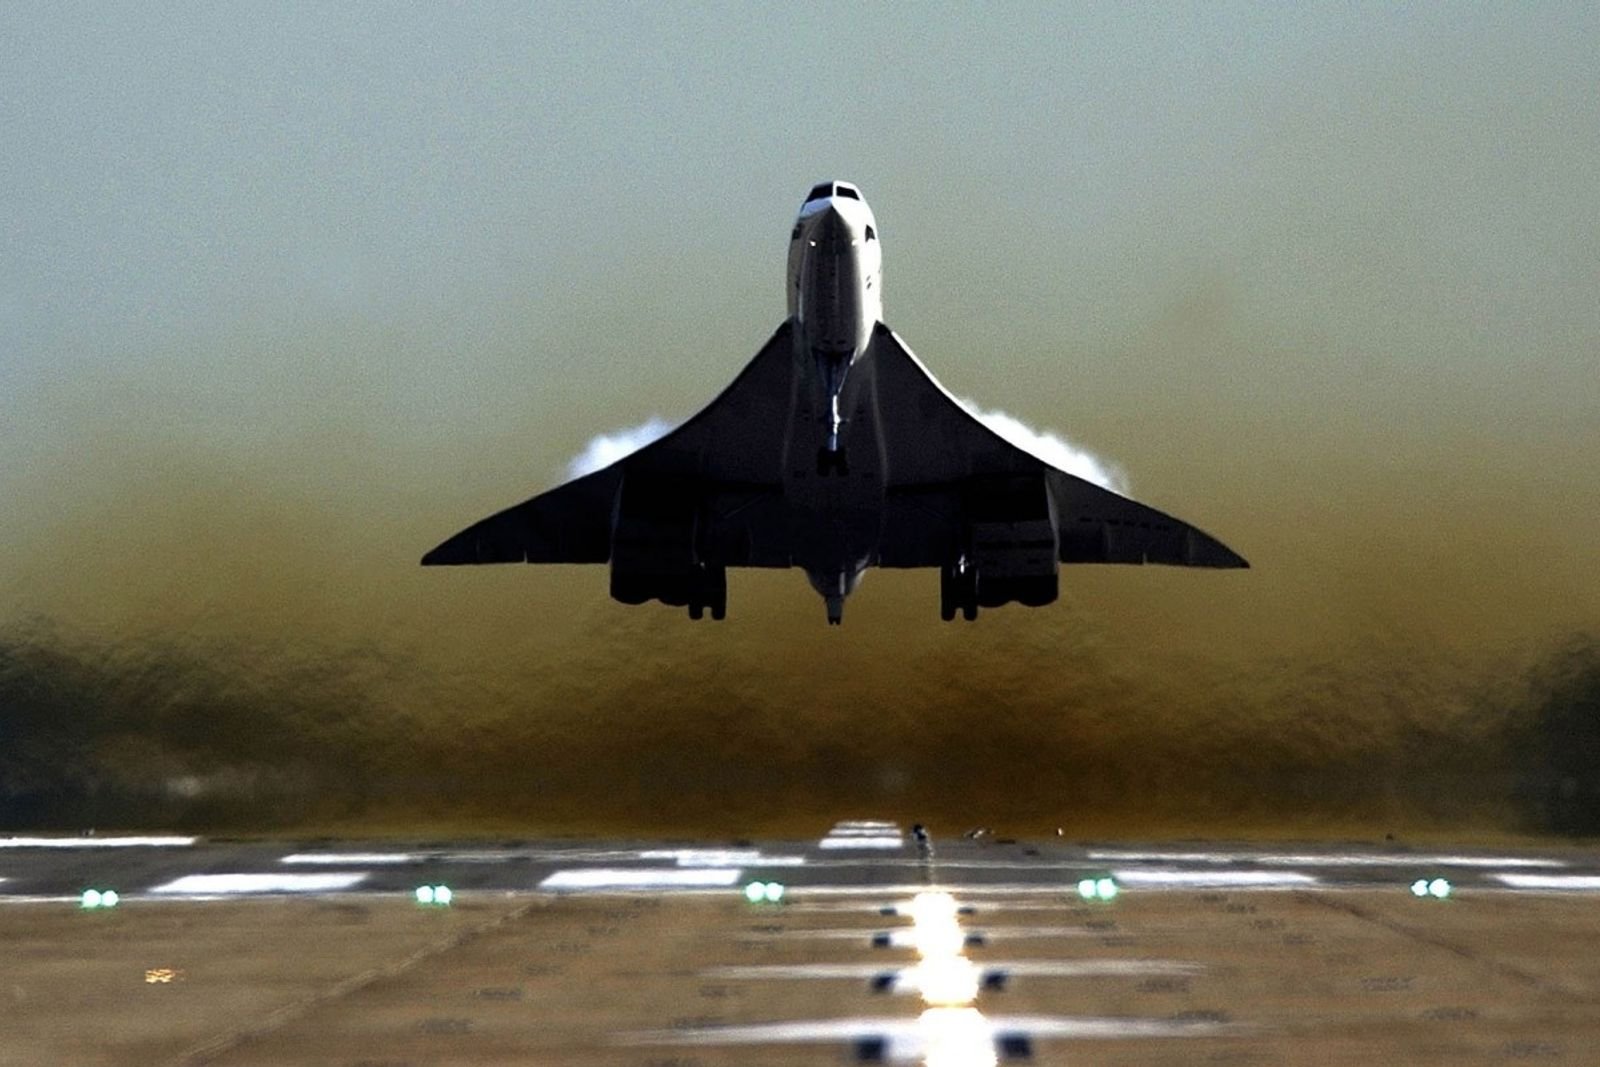 How Concorde Pushed the Limits – Then Pushed Them Too Far